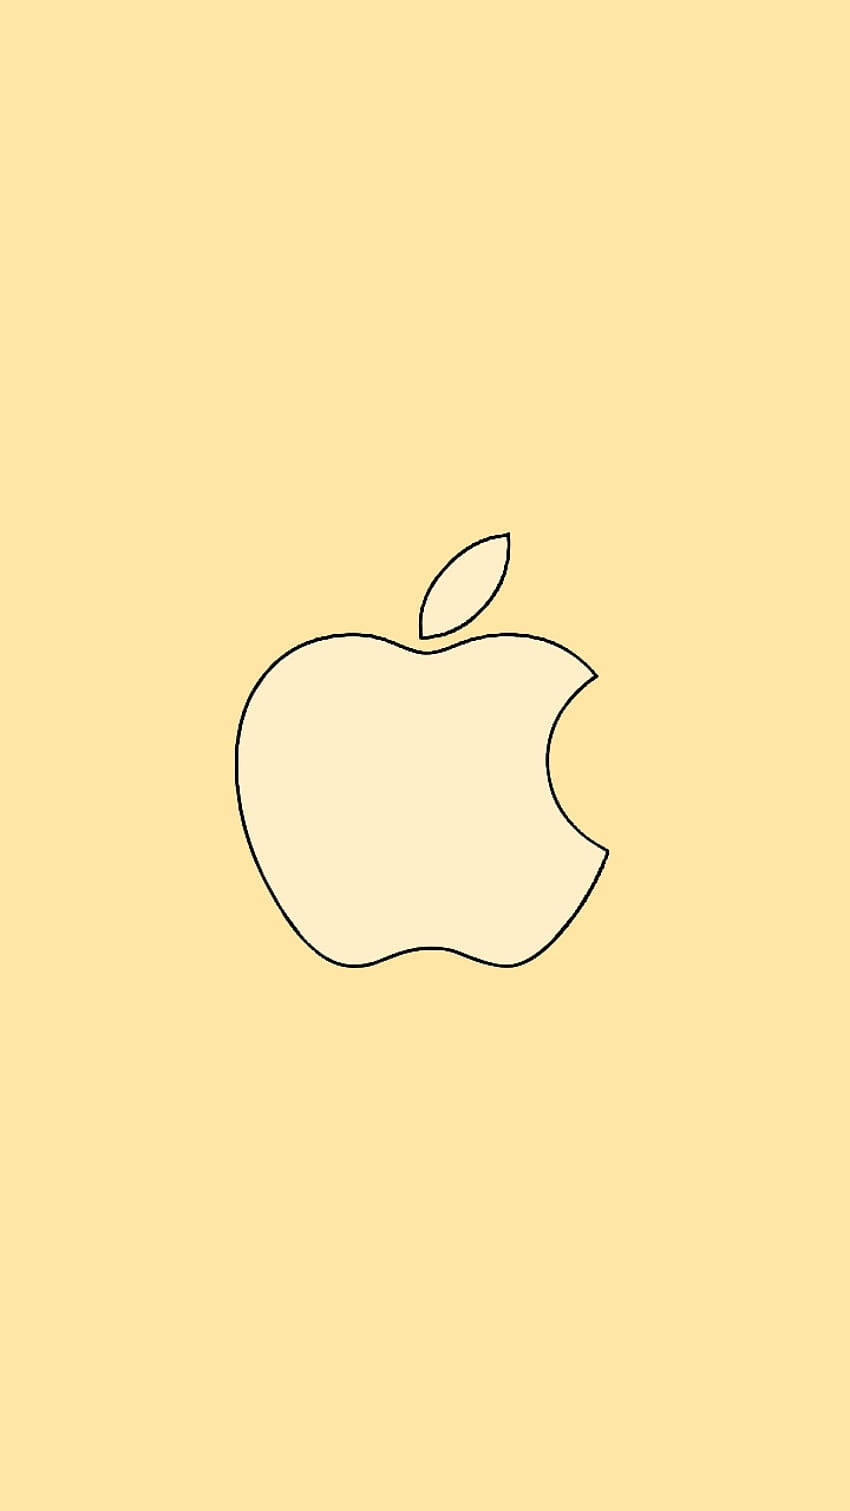 Apple Logo Colorful Iphone 5s Picture